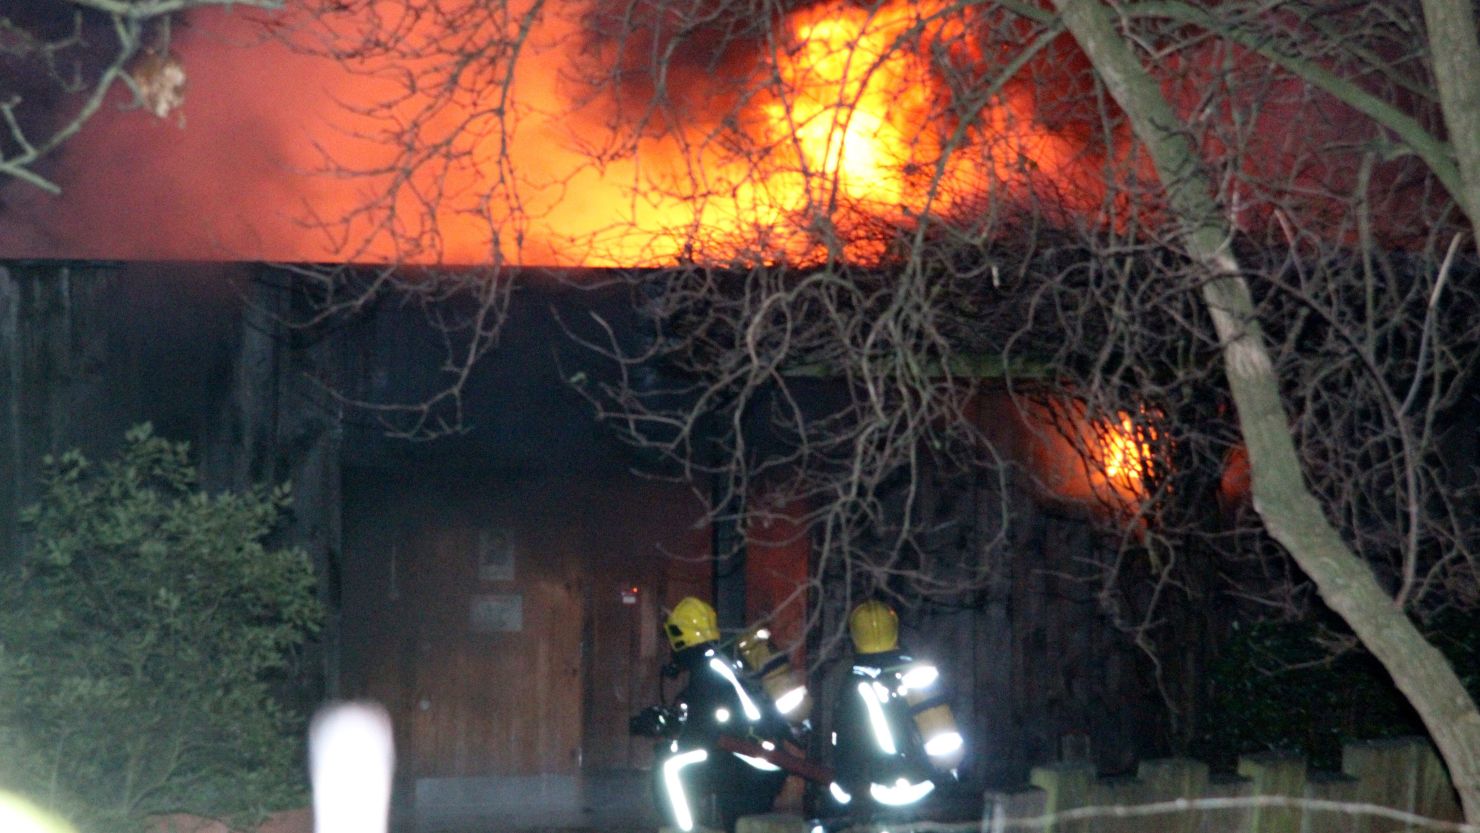 Flames rise over Regent's Park in London early Saturday as firefighters tackle the blaze at the zoo.